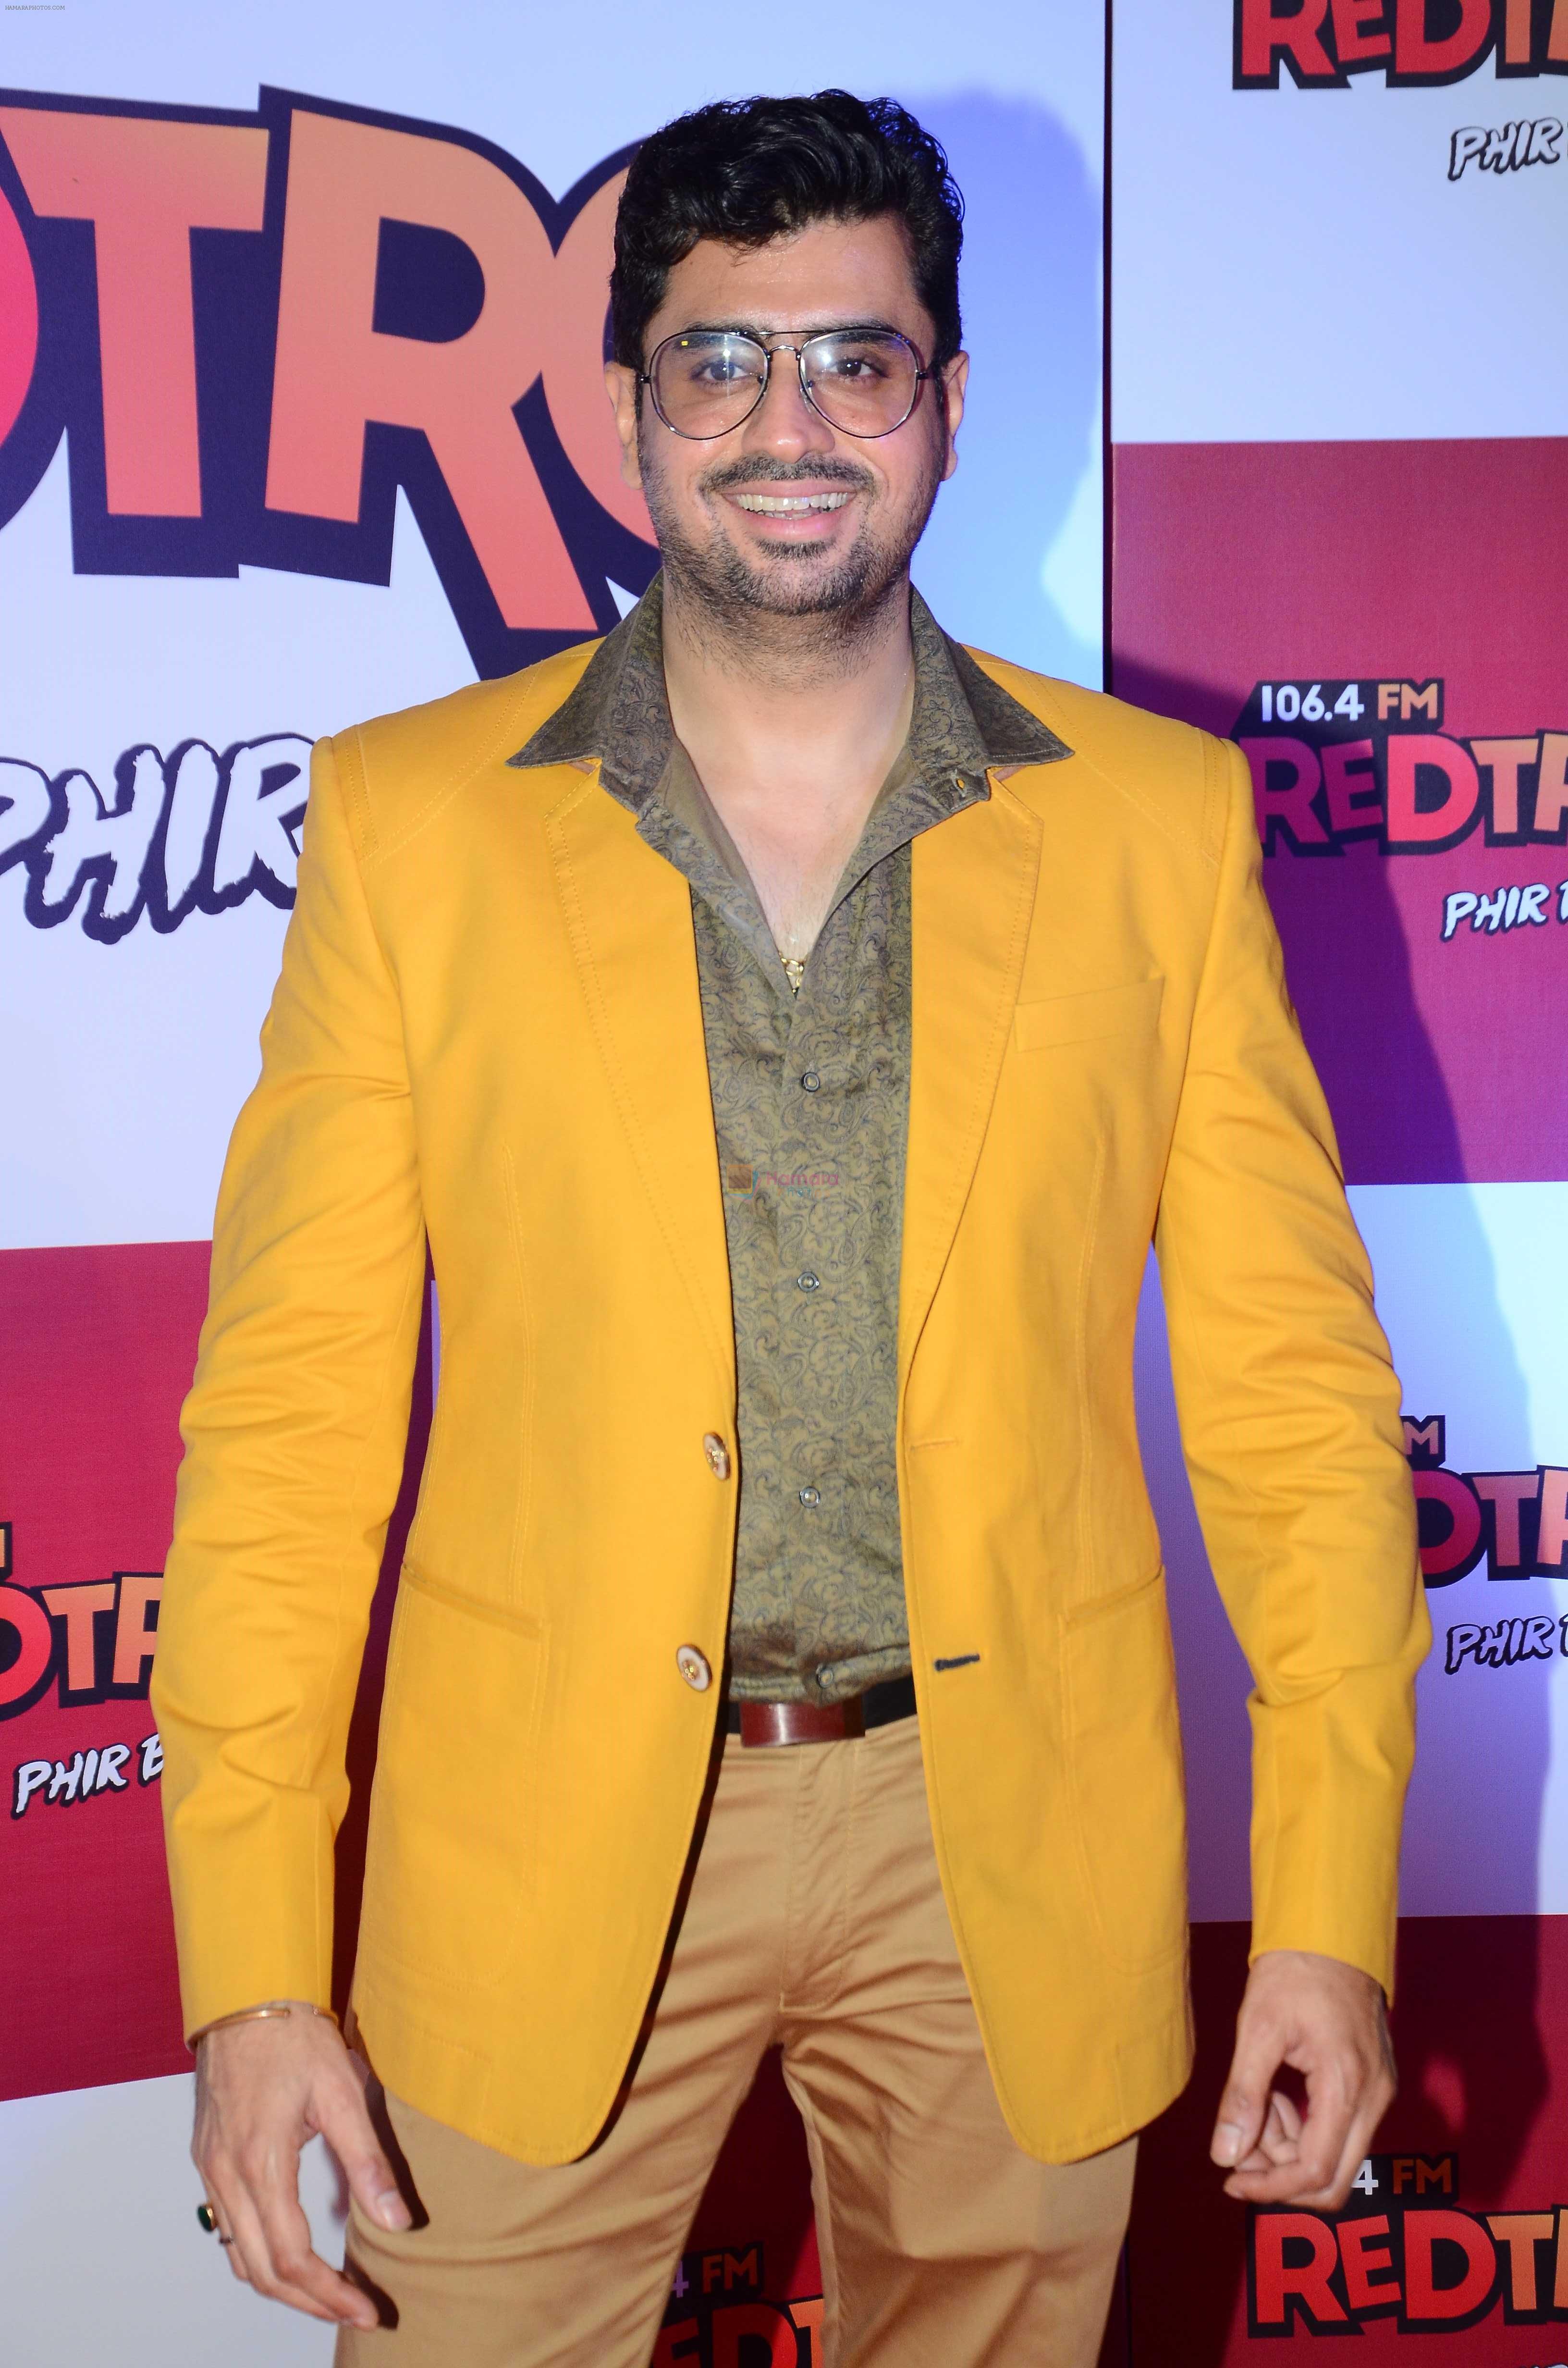 Pritam Singh during the party organised by Red FM to celebrate the launch of its new radio station Redtro 106.4 in Mumbai India on 22 July 2016